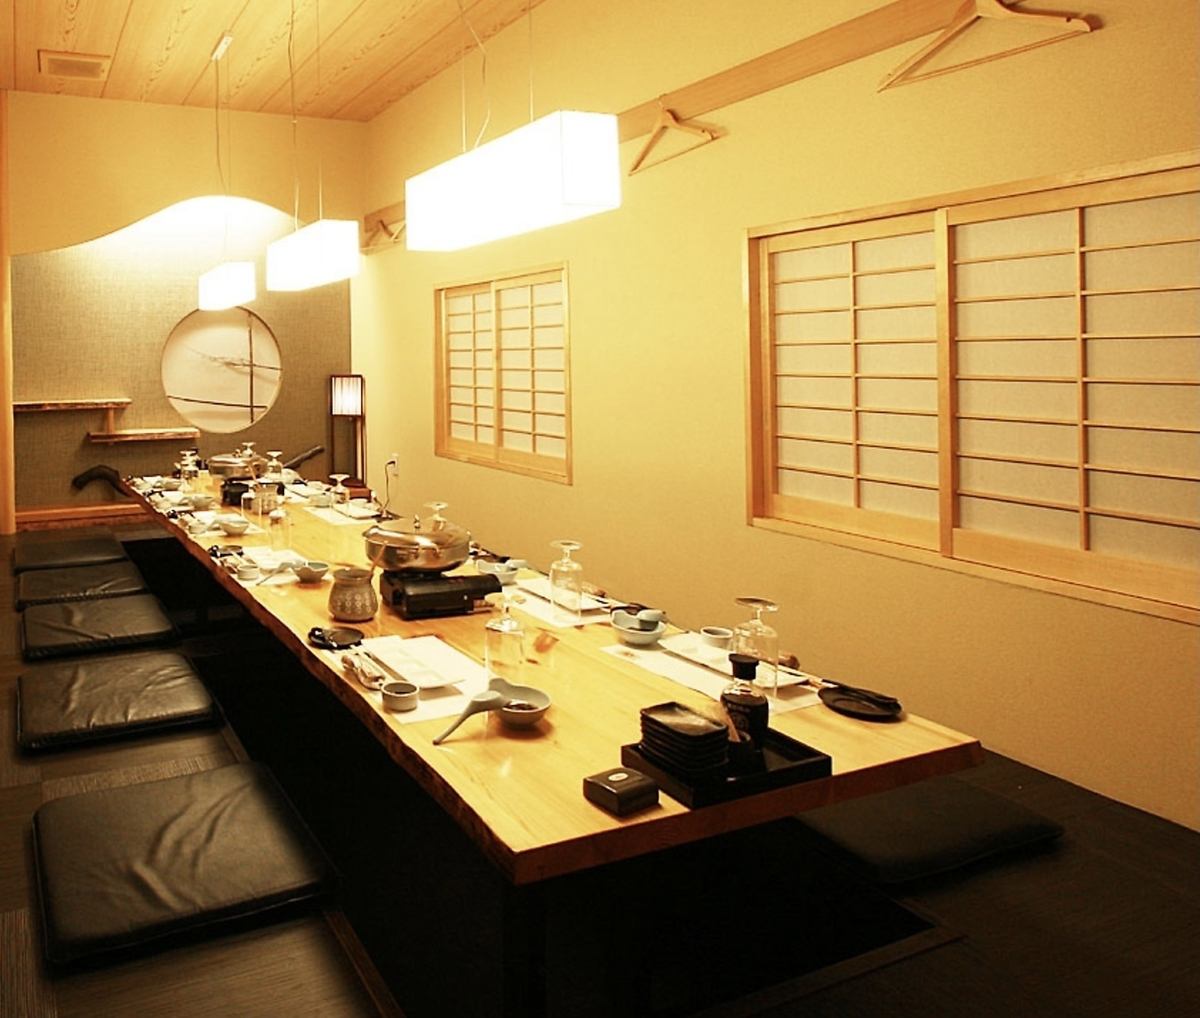 You can spend a relaxing time in a private room where you can enjoy the Japanese atmosphere.